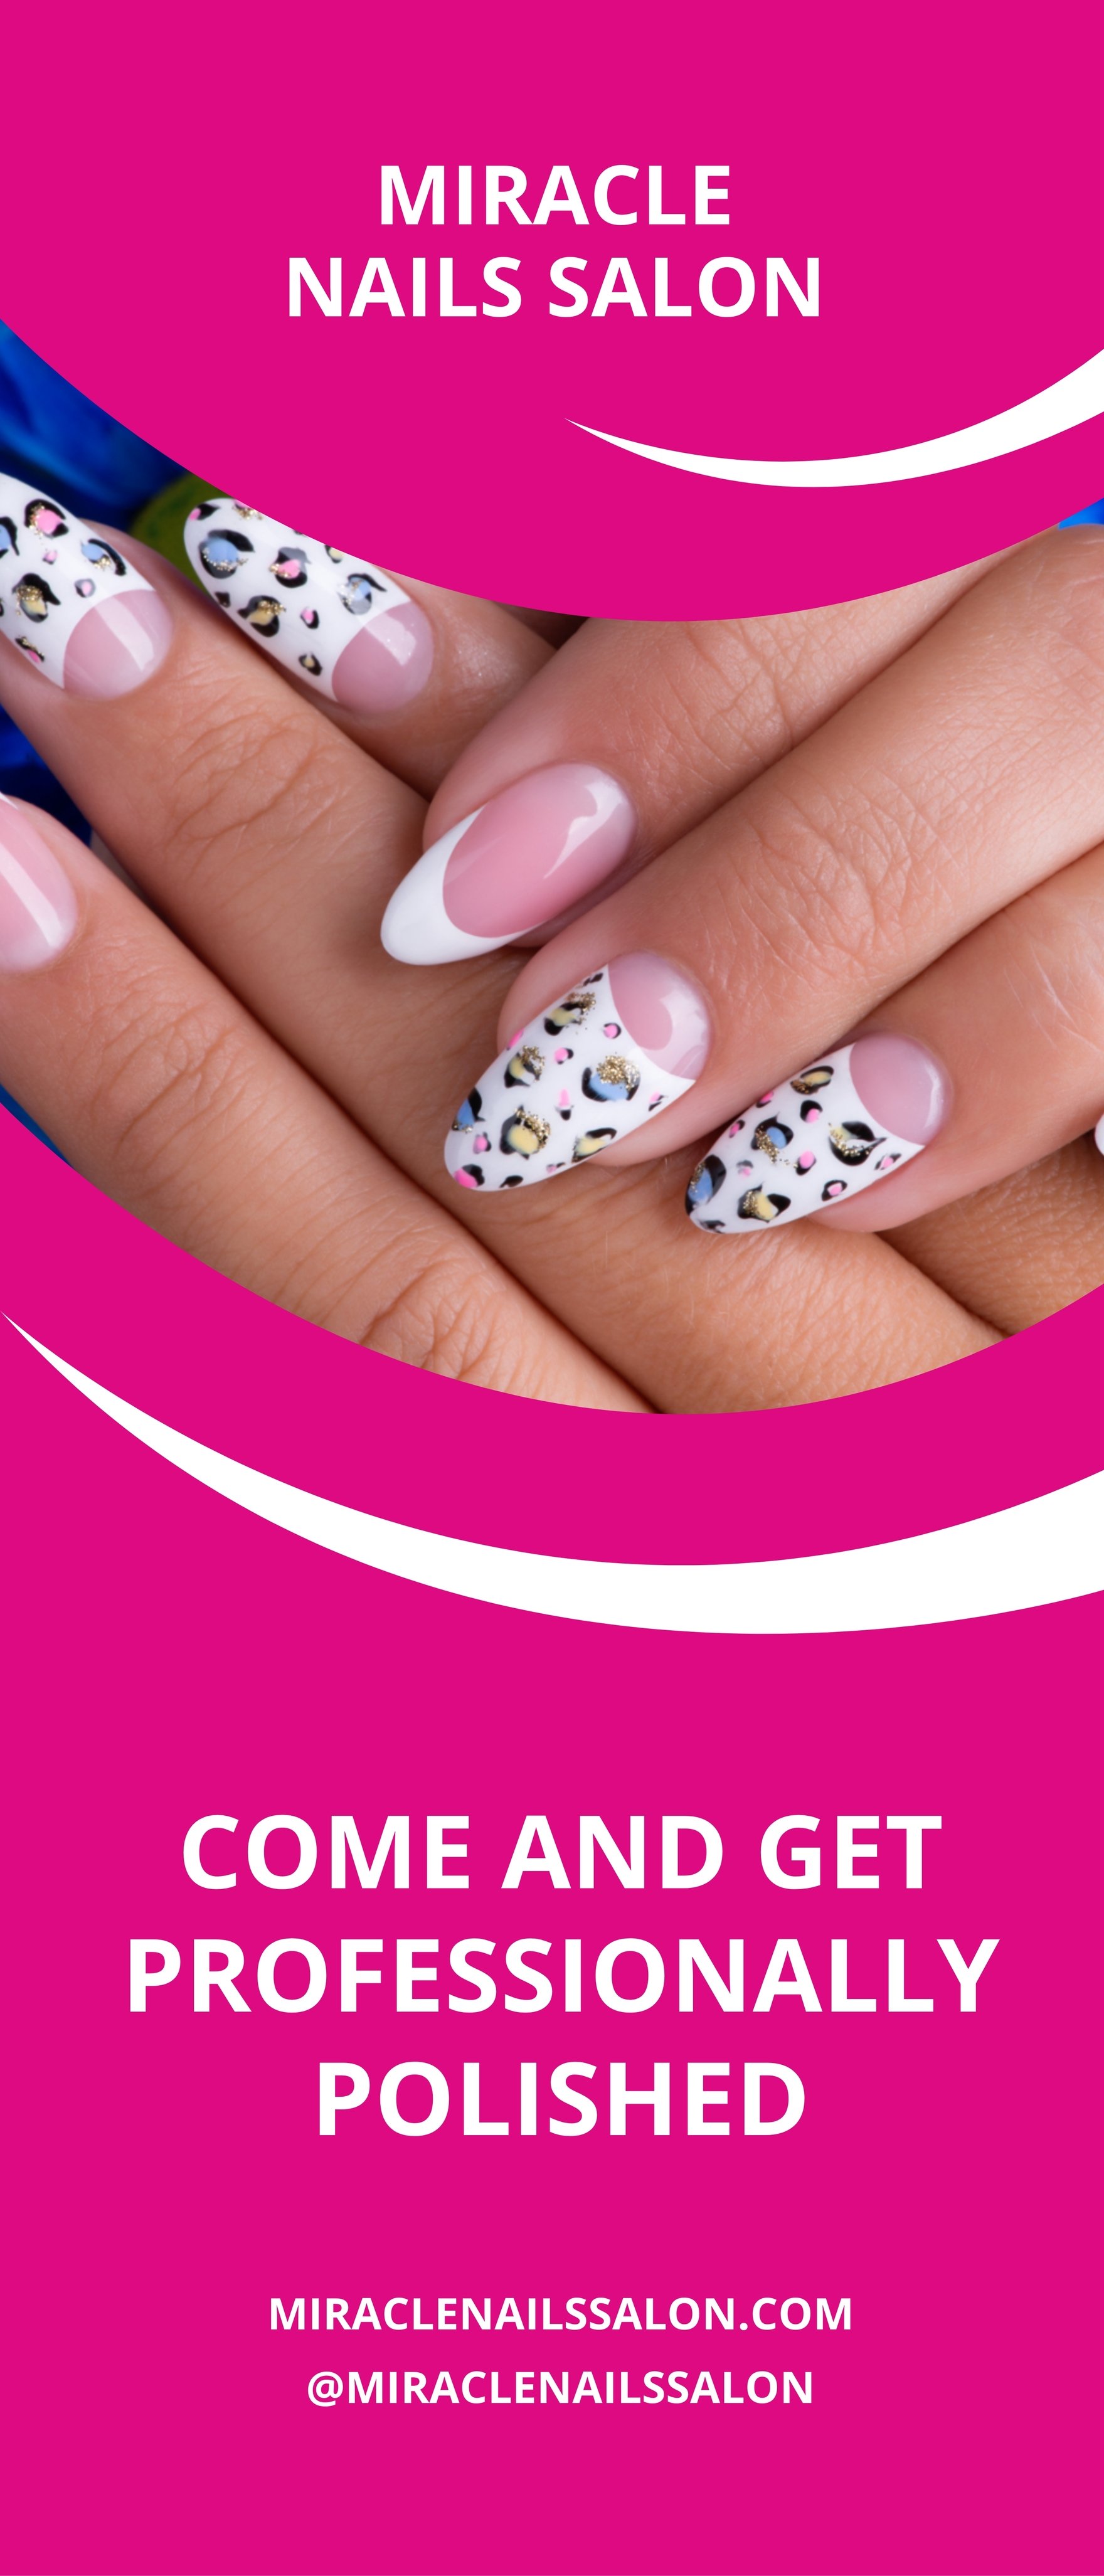 Nail Studio Rollup Banner Template in Word, Google Docs, Apple Pages, Publisher